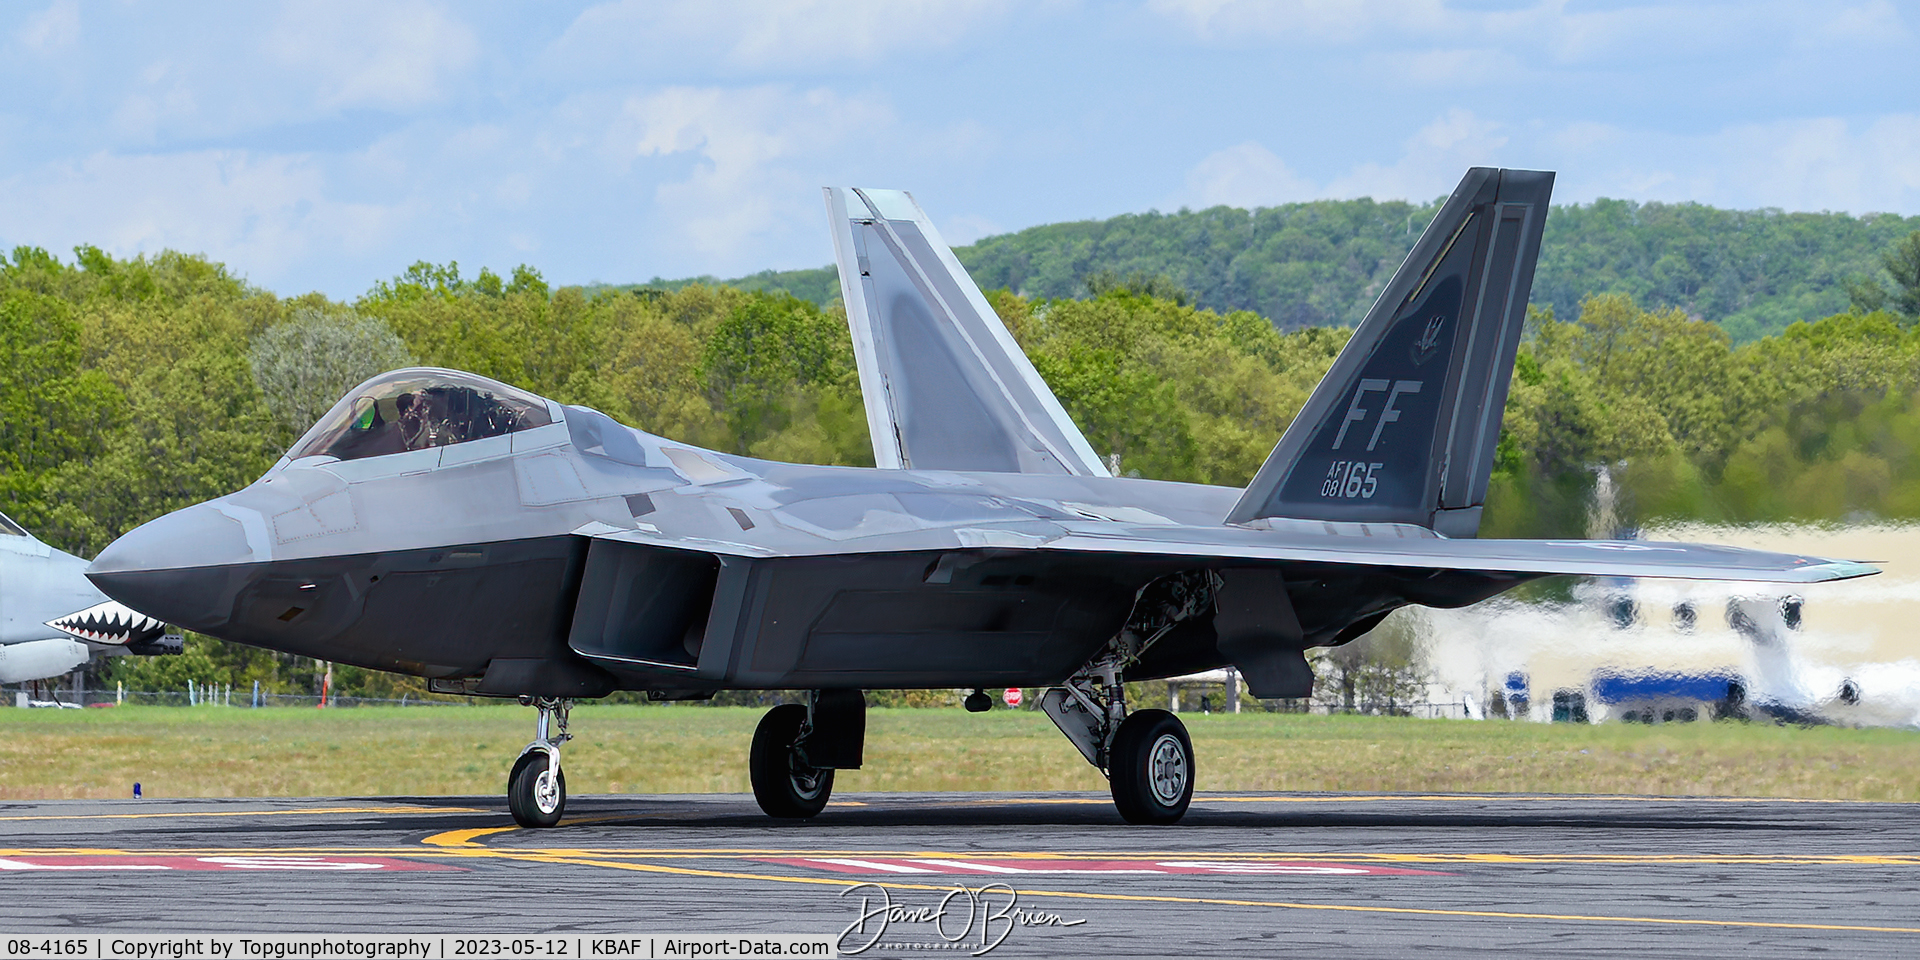 08-4165, Lockheed Martin F-22A Raptor C/N 4165, Former 104th FW maintainer & pilot now flying F-22's comes back home for the Westfield air show